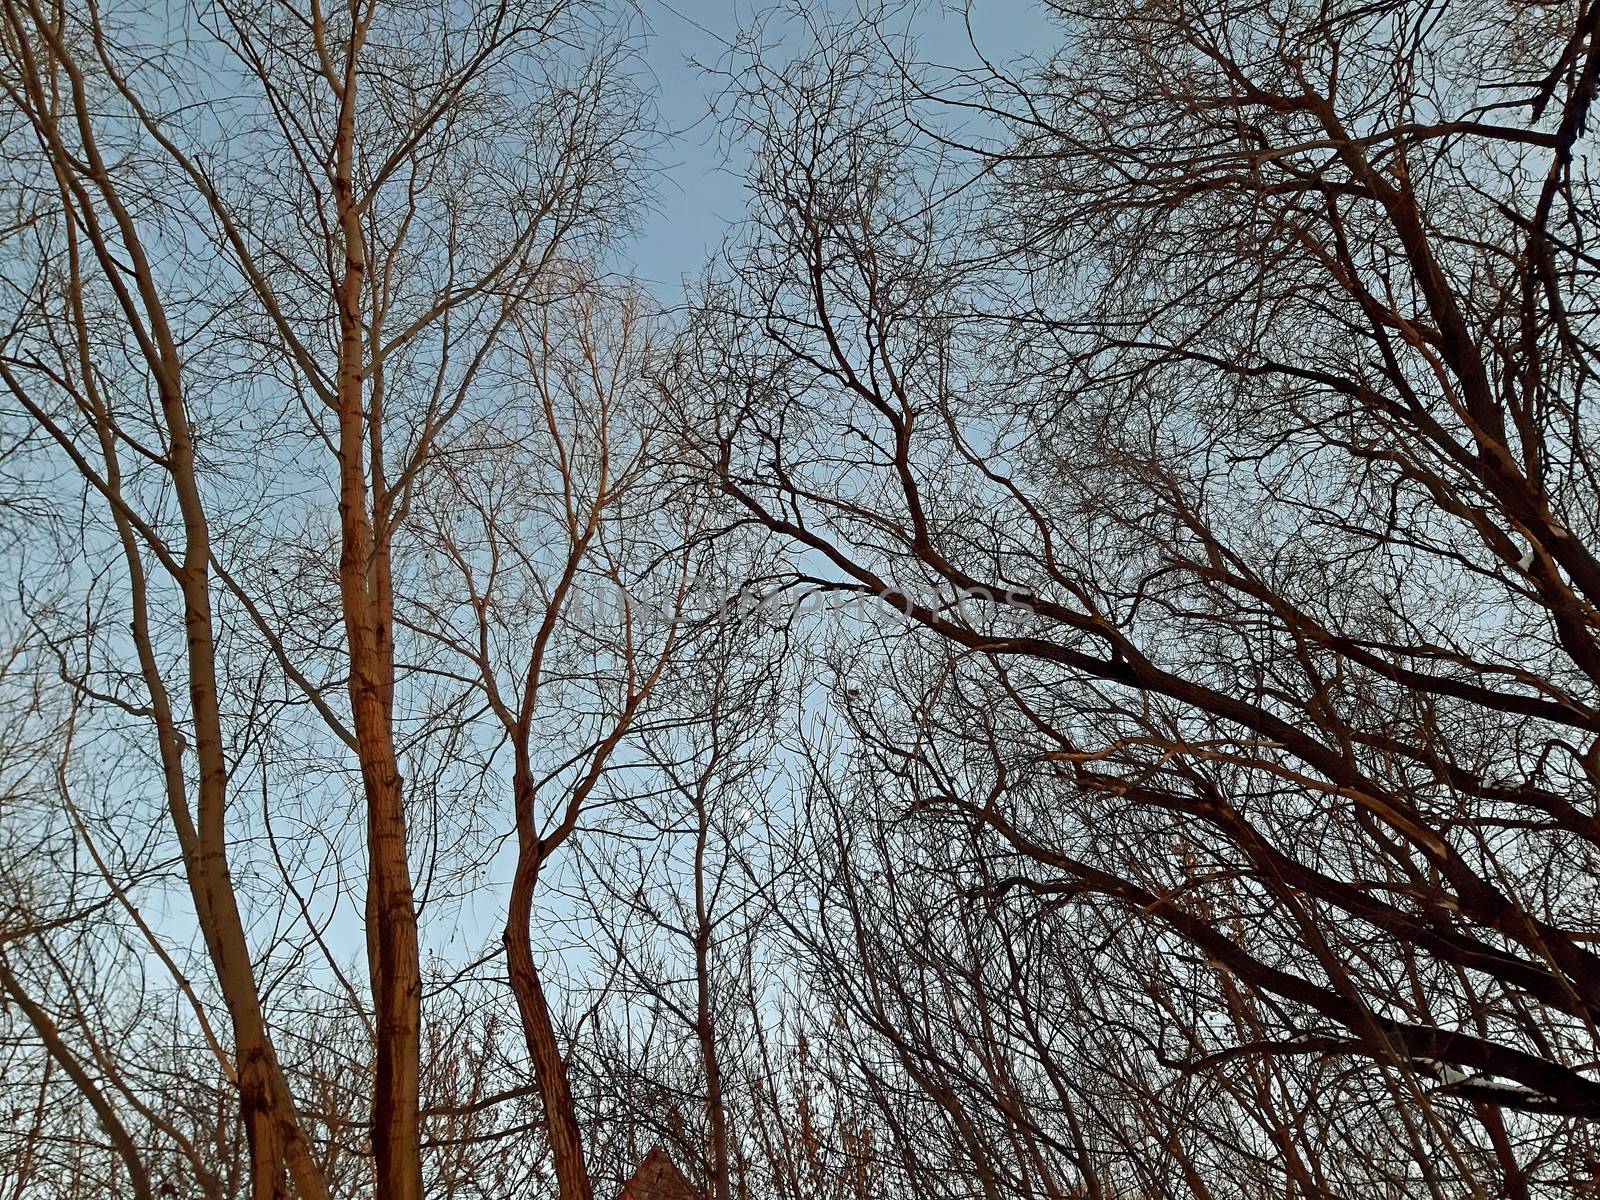 A few branches of trees on the clear sky in the winter.